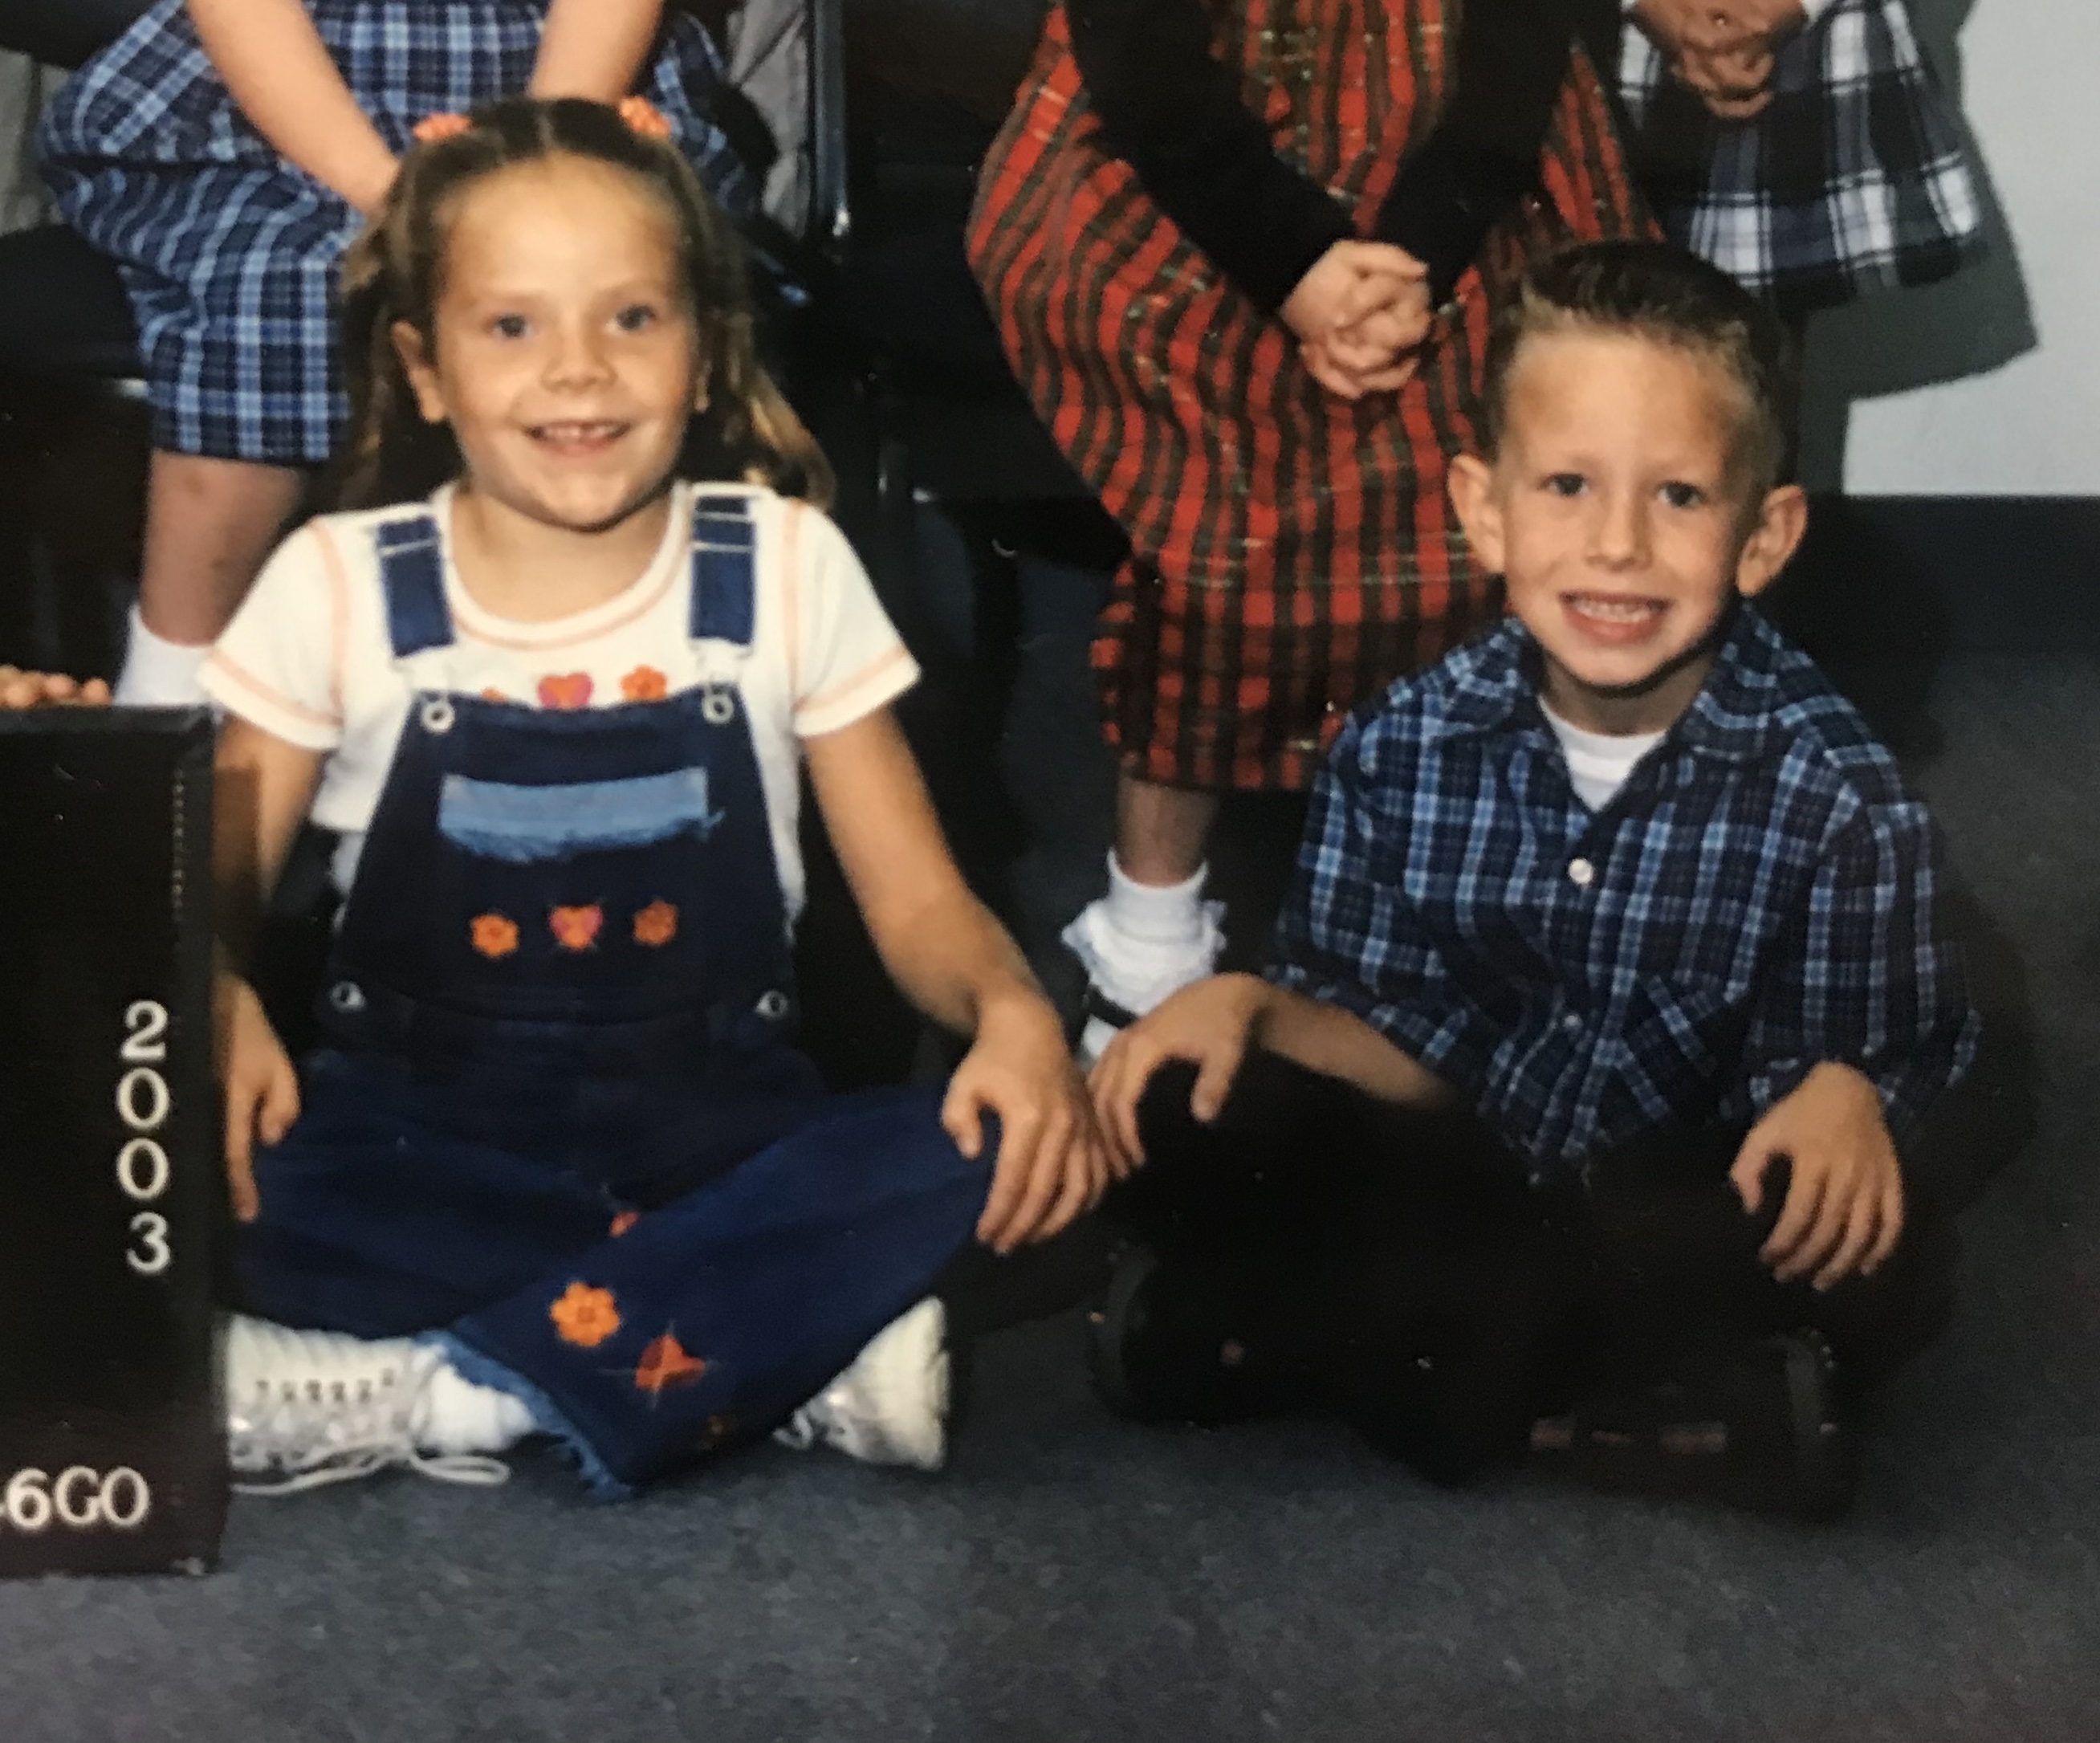 Colton and Carly side by side 2003